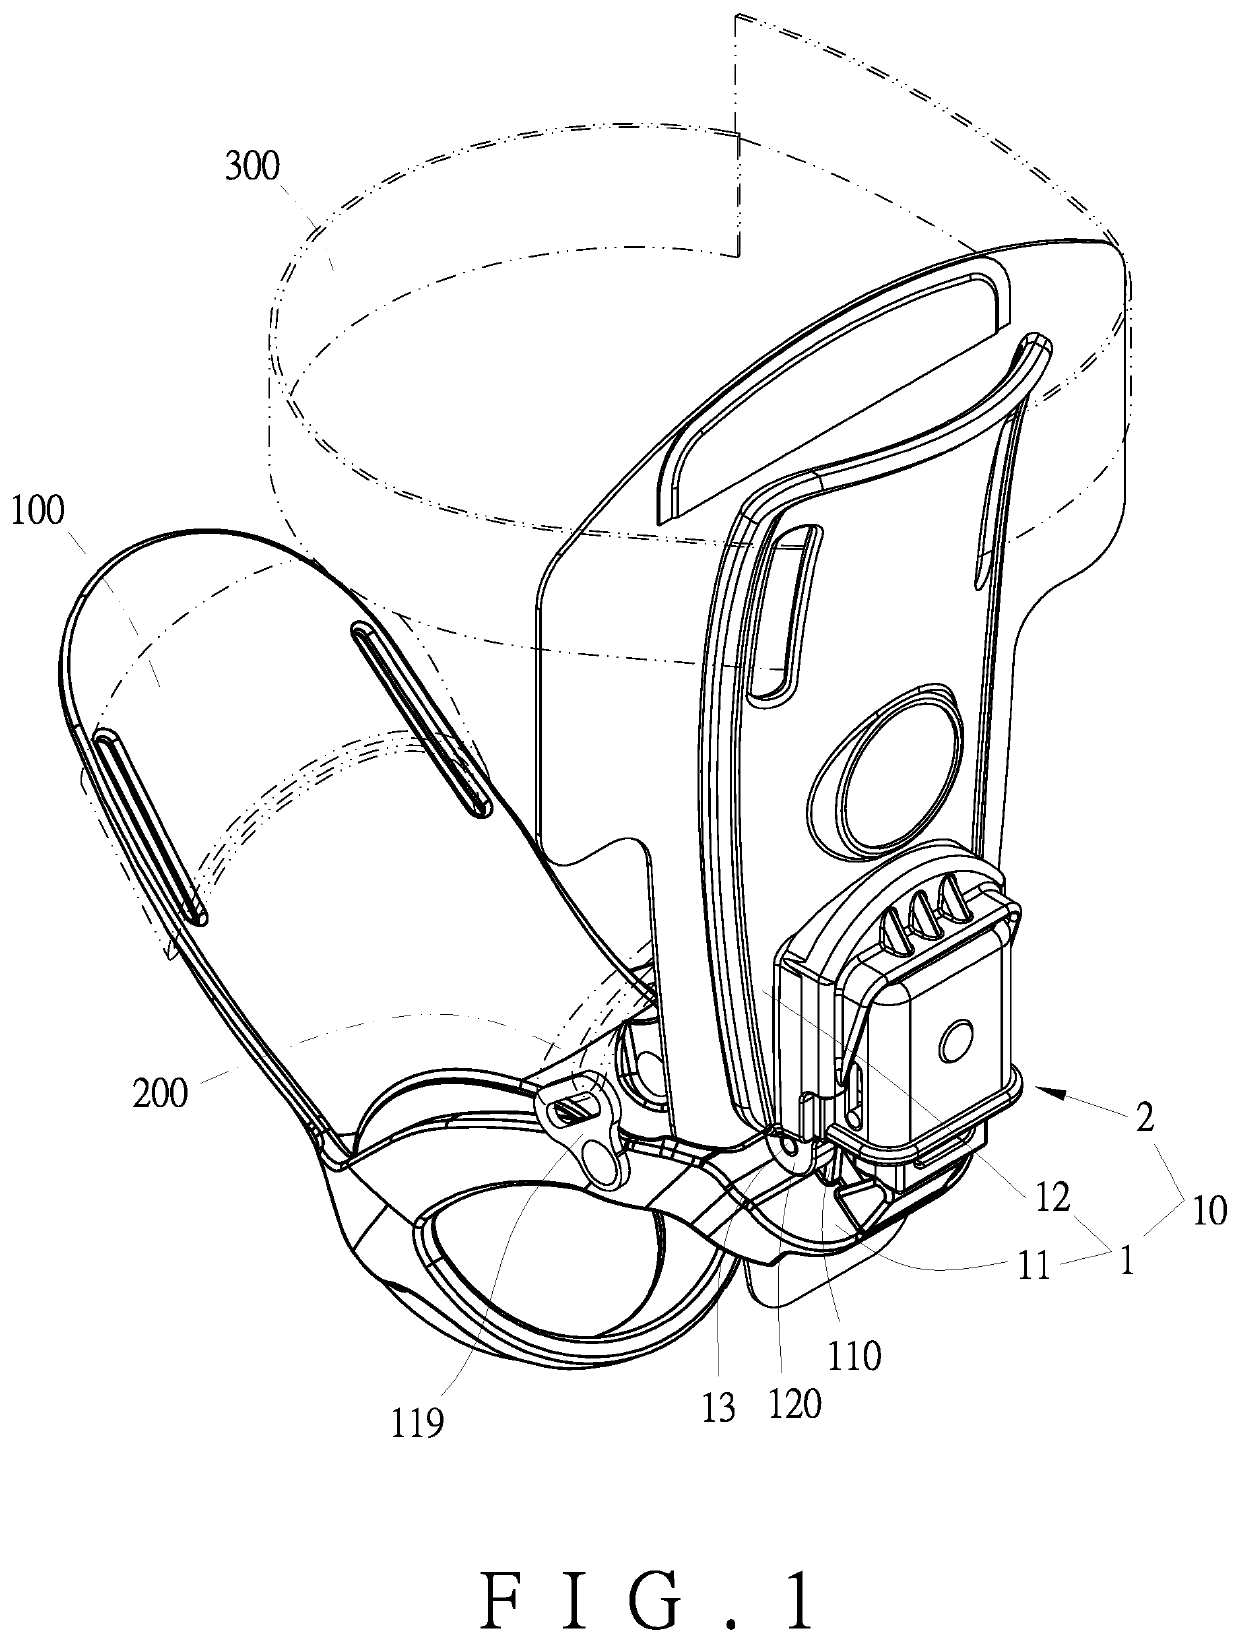 Foot assistive device for improving drop foot gait